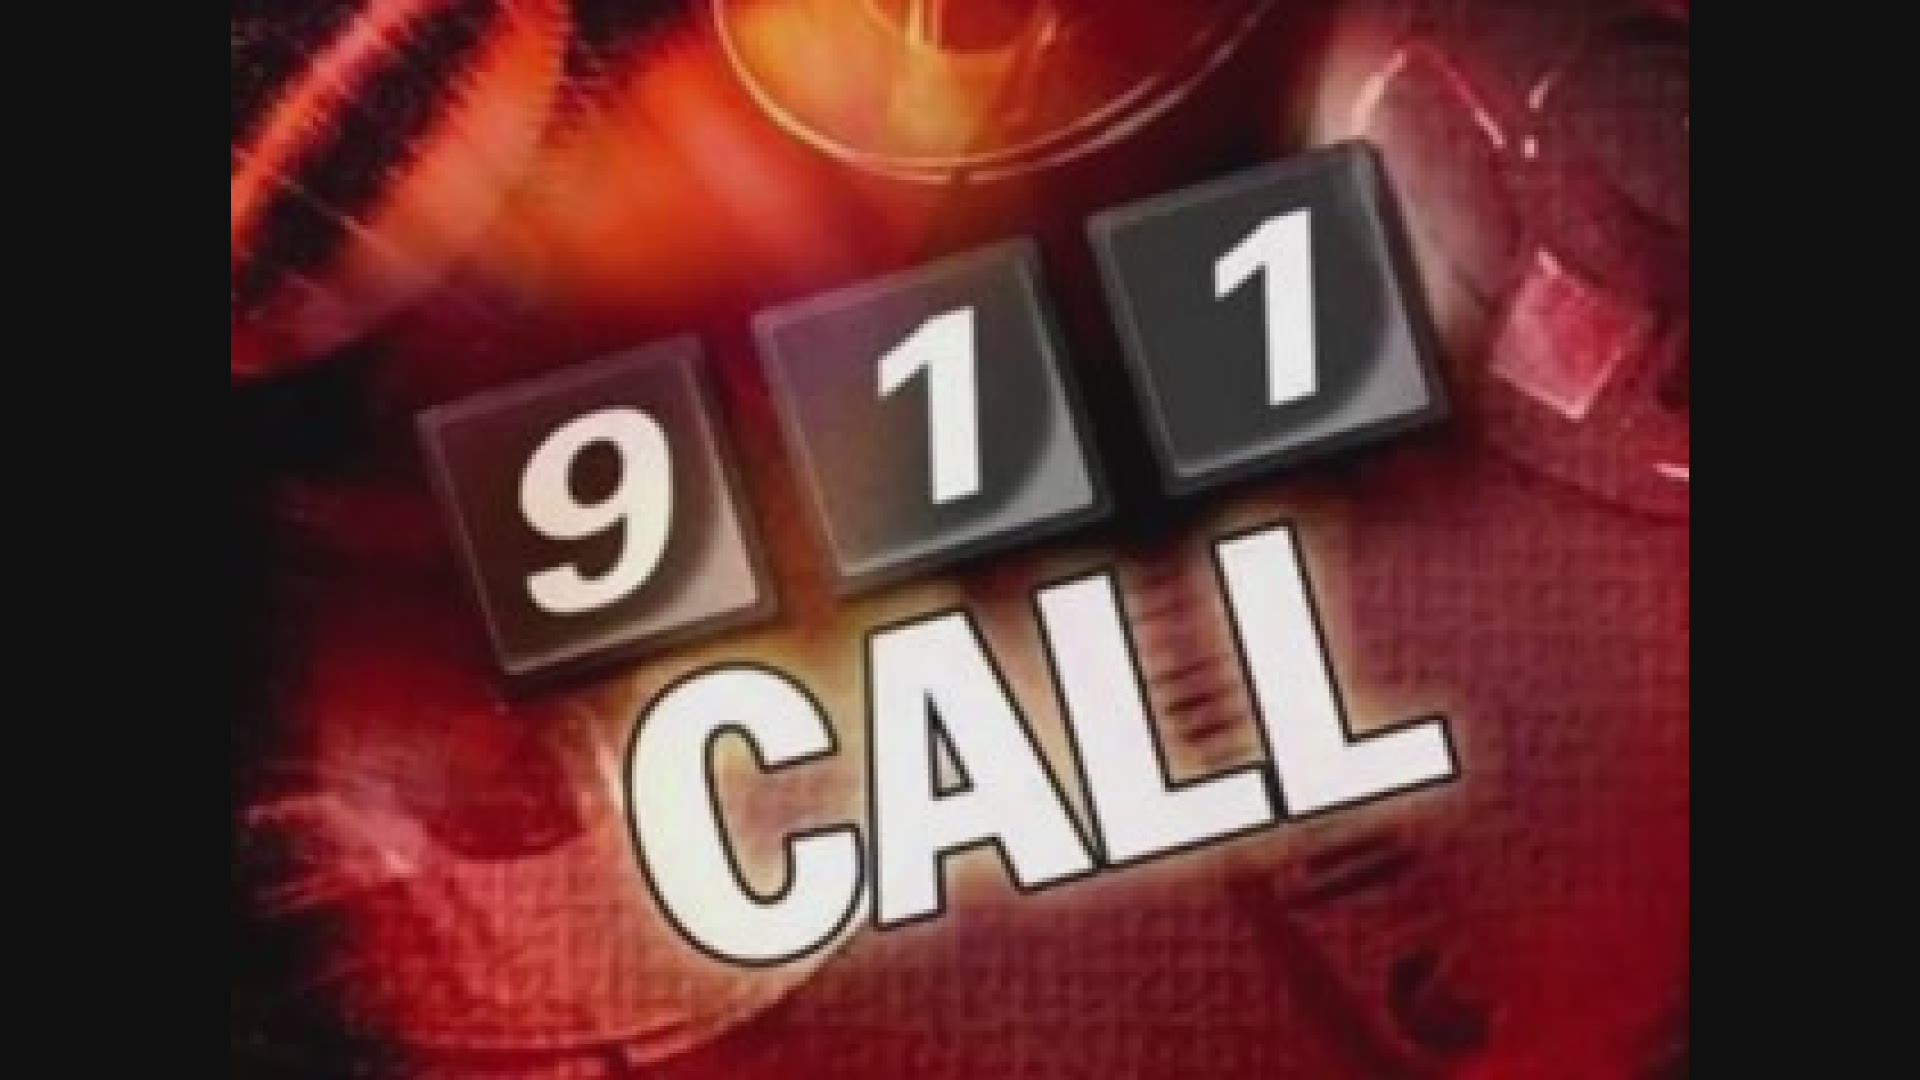 911 call from Kentucky to Ohio with possible Timmothy Pitzen discovery